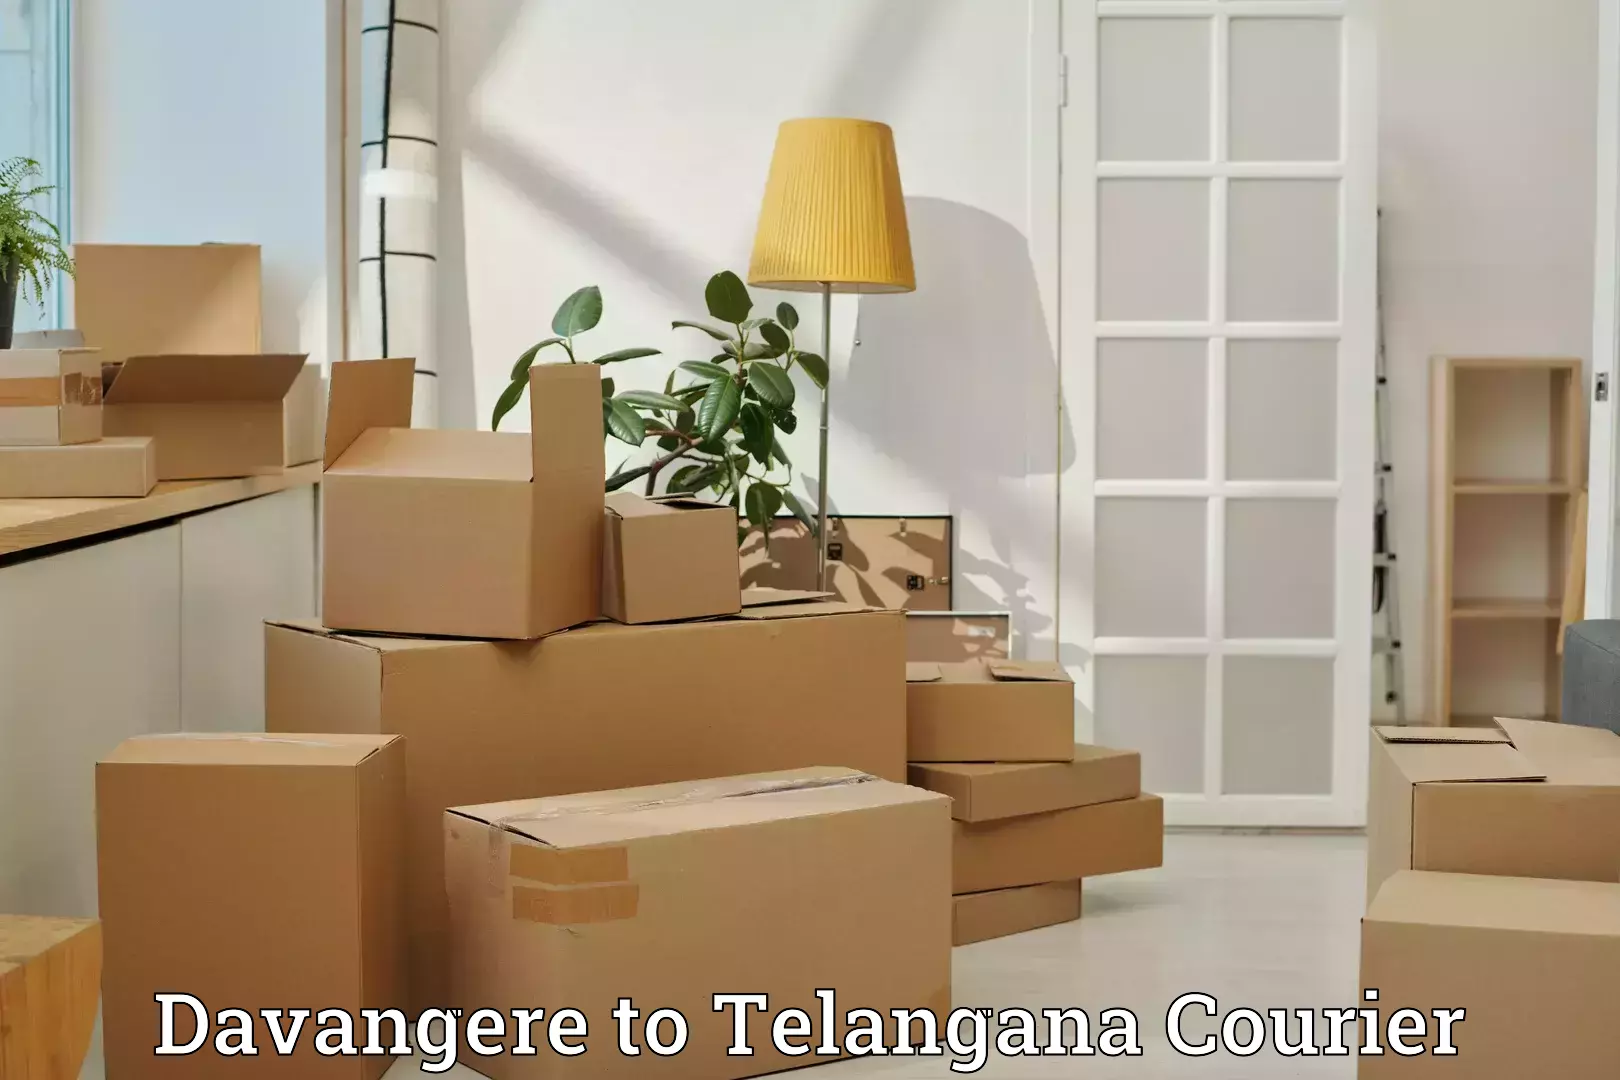 Luggage delivery news Davangere to Yellareddy